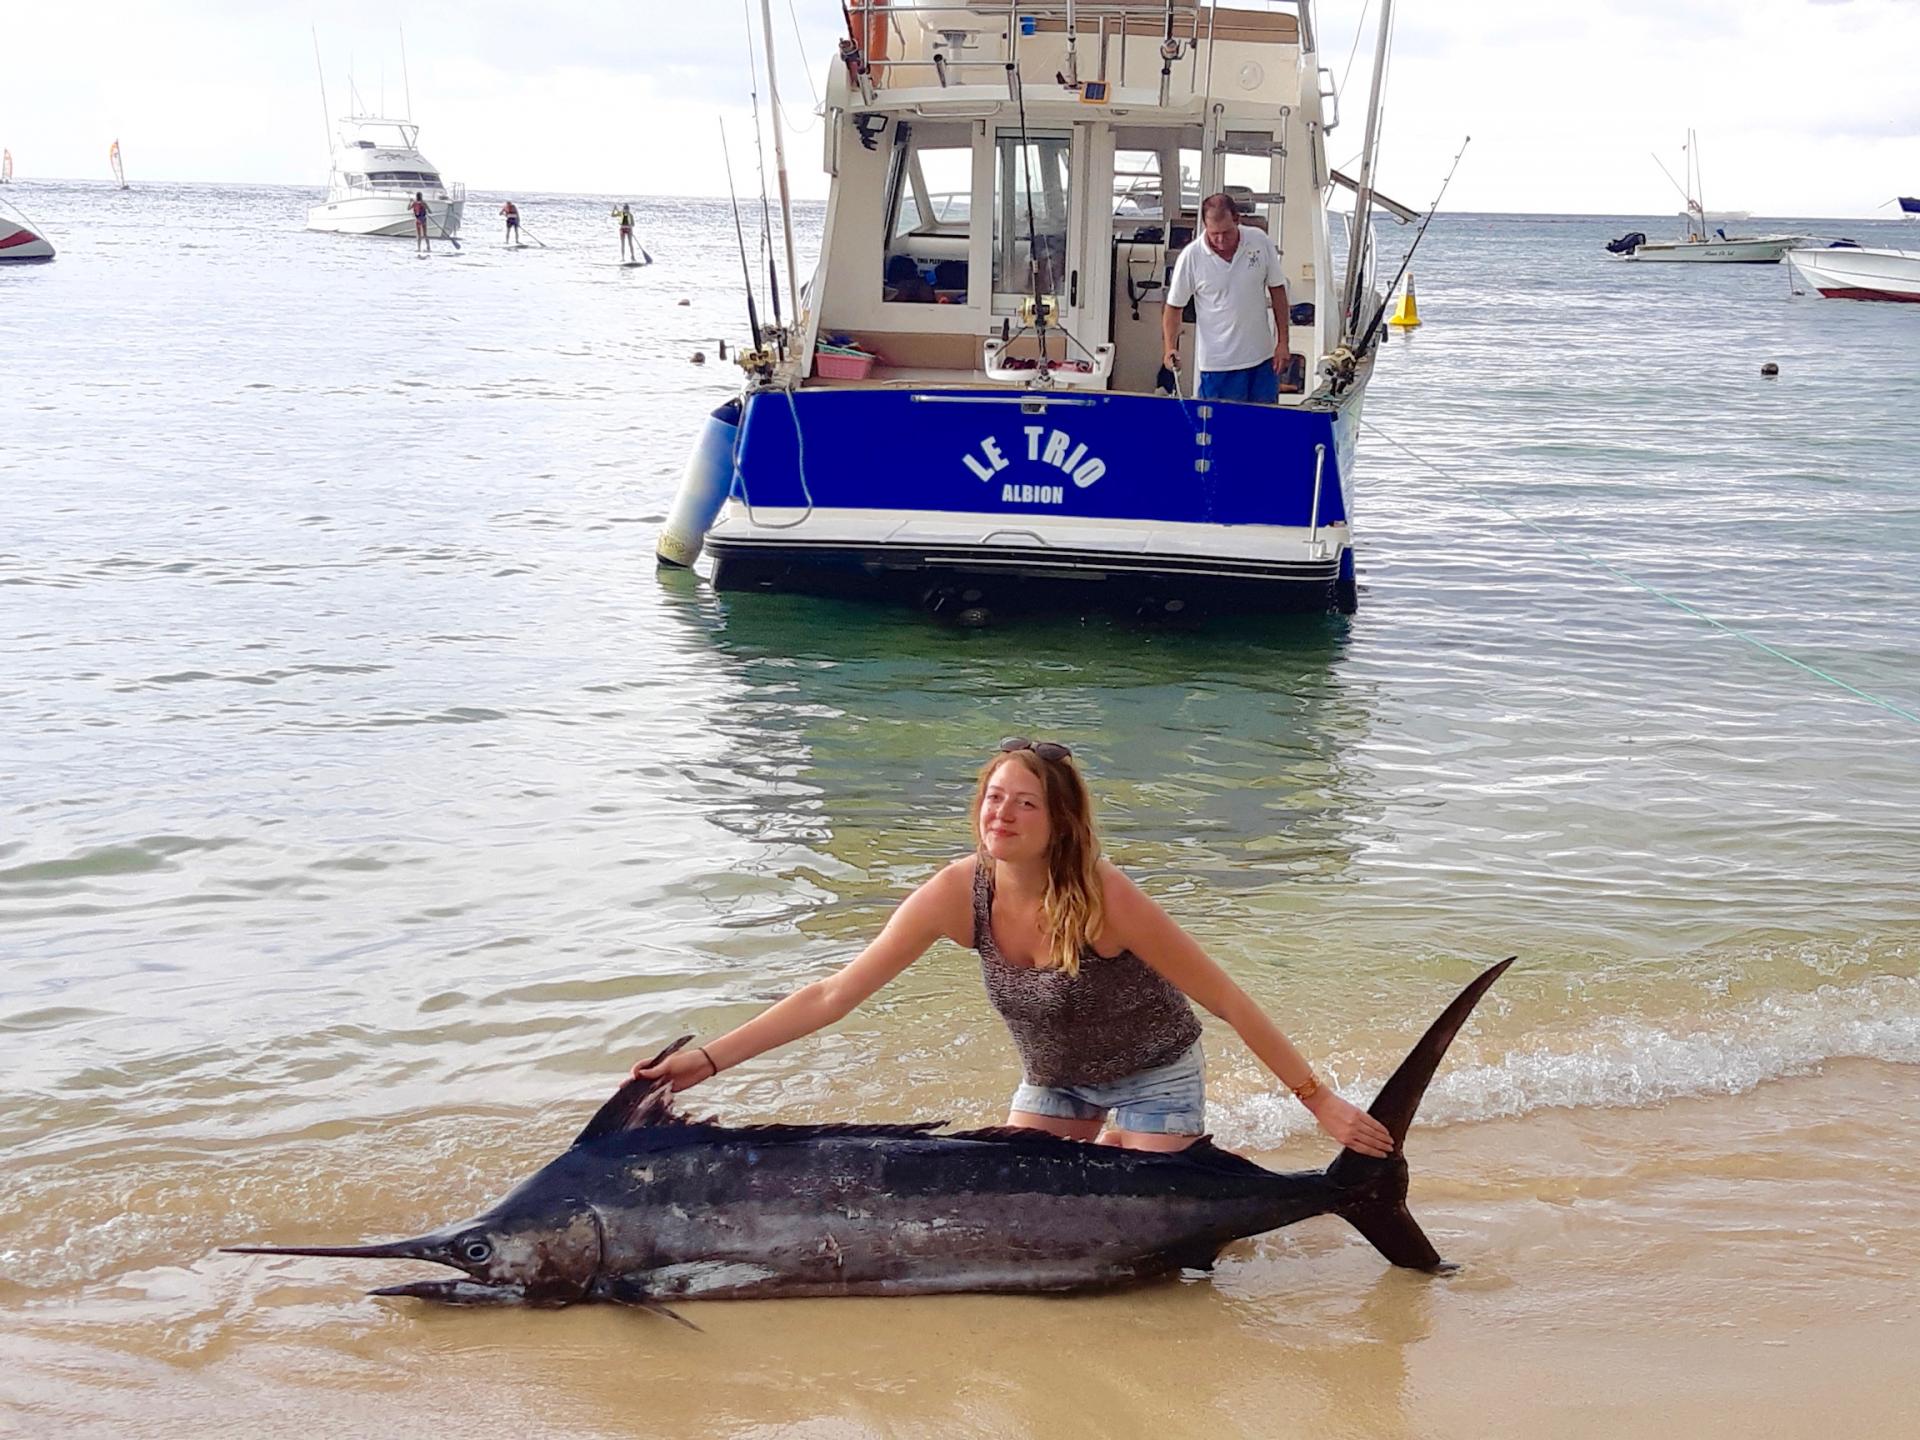 Camille and the marlin 160 lbs